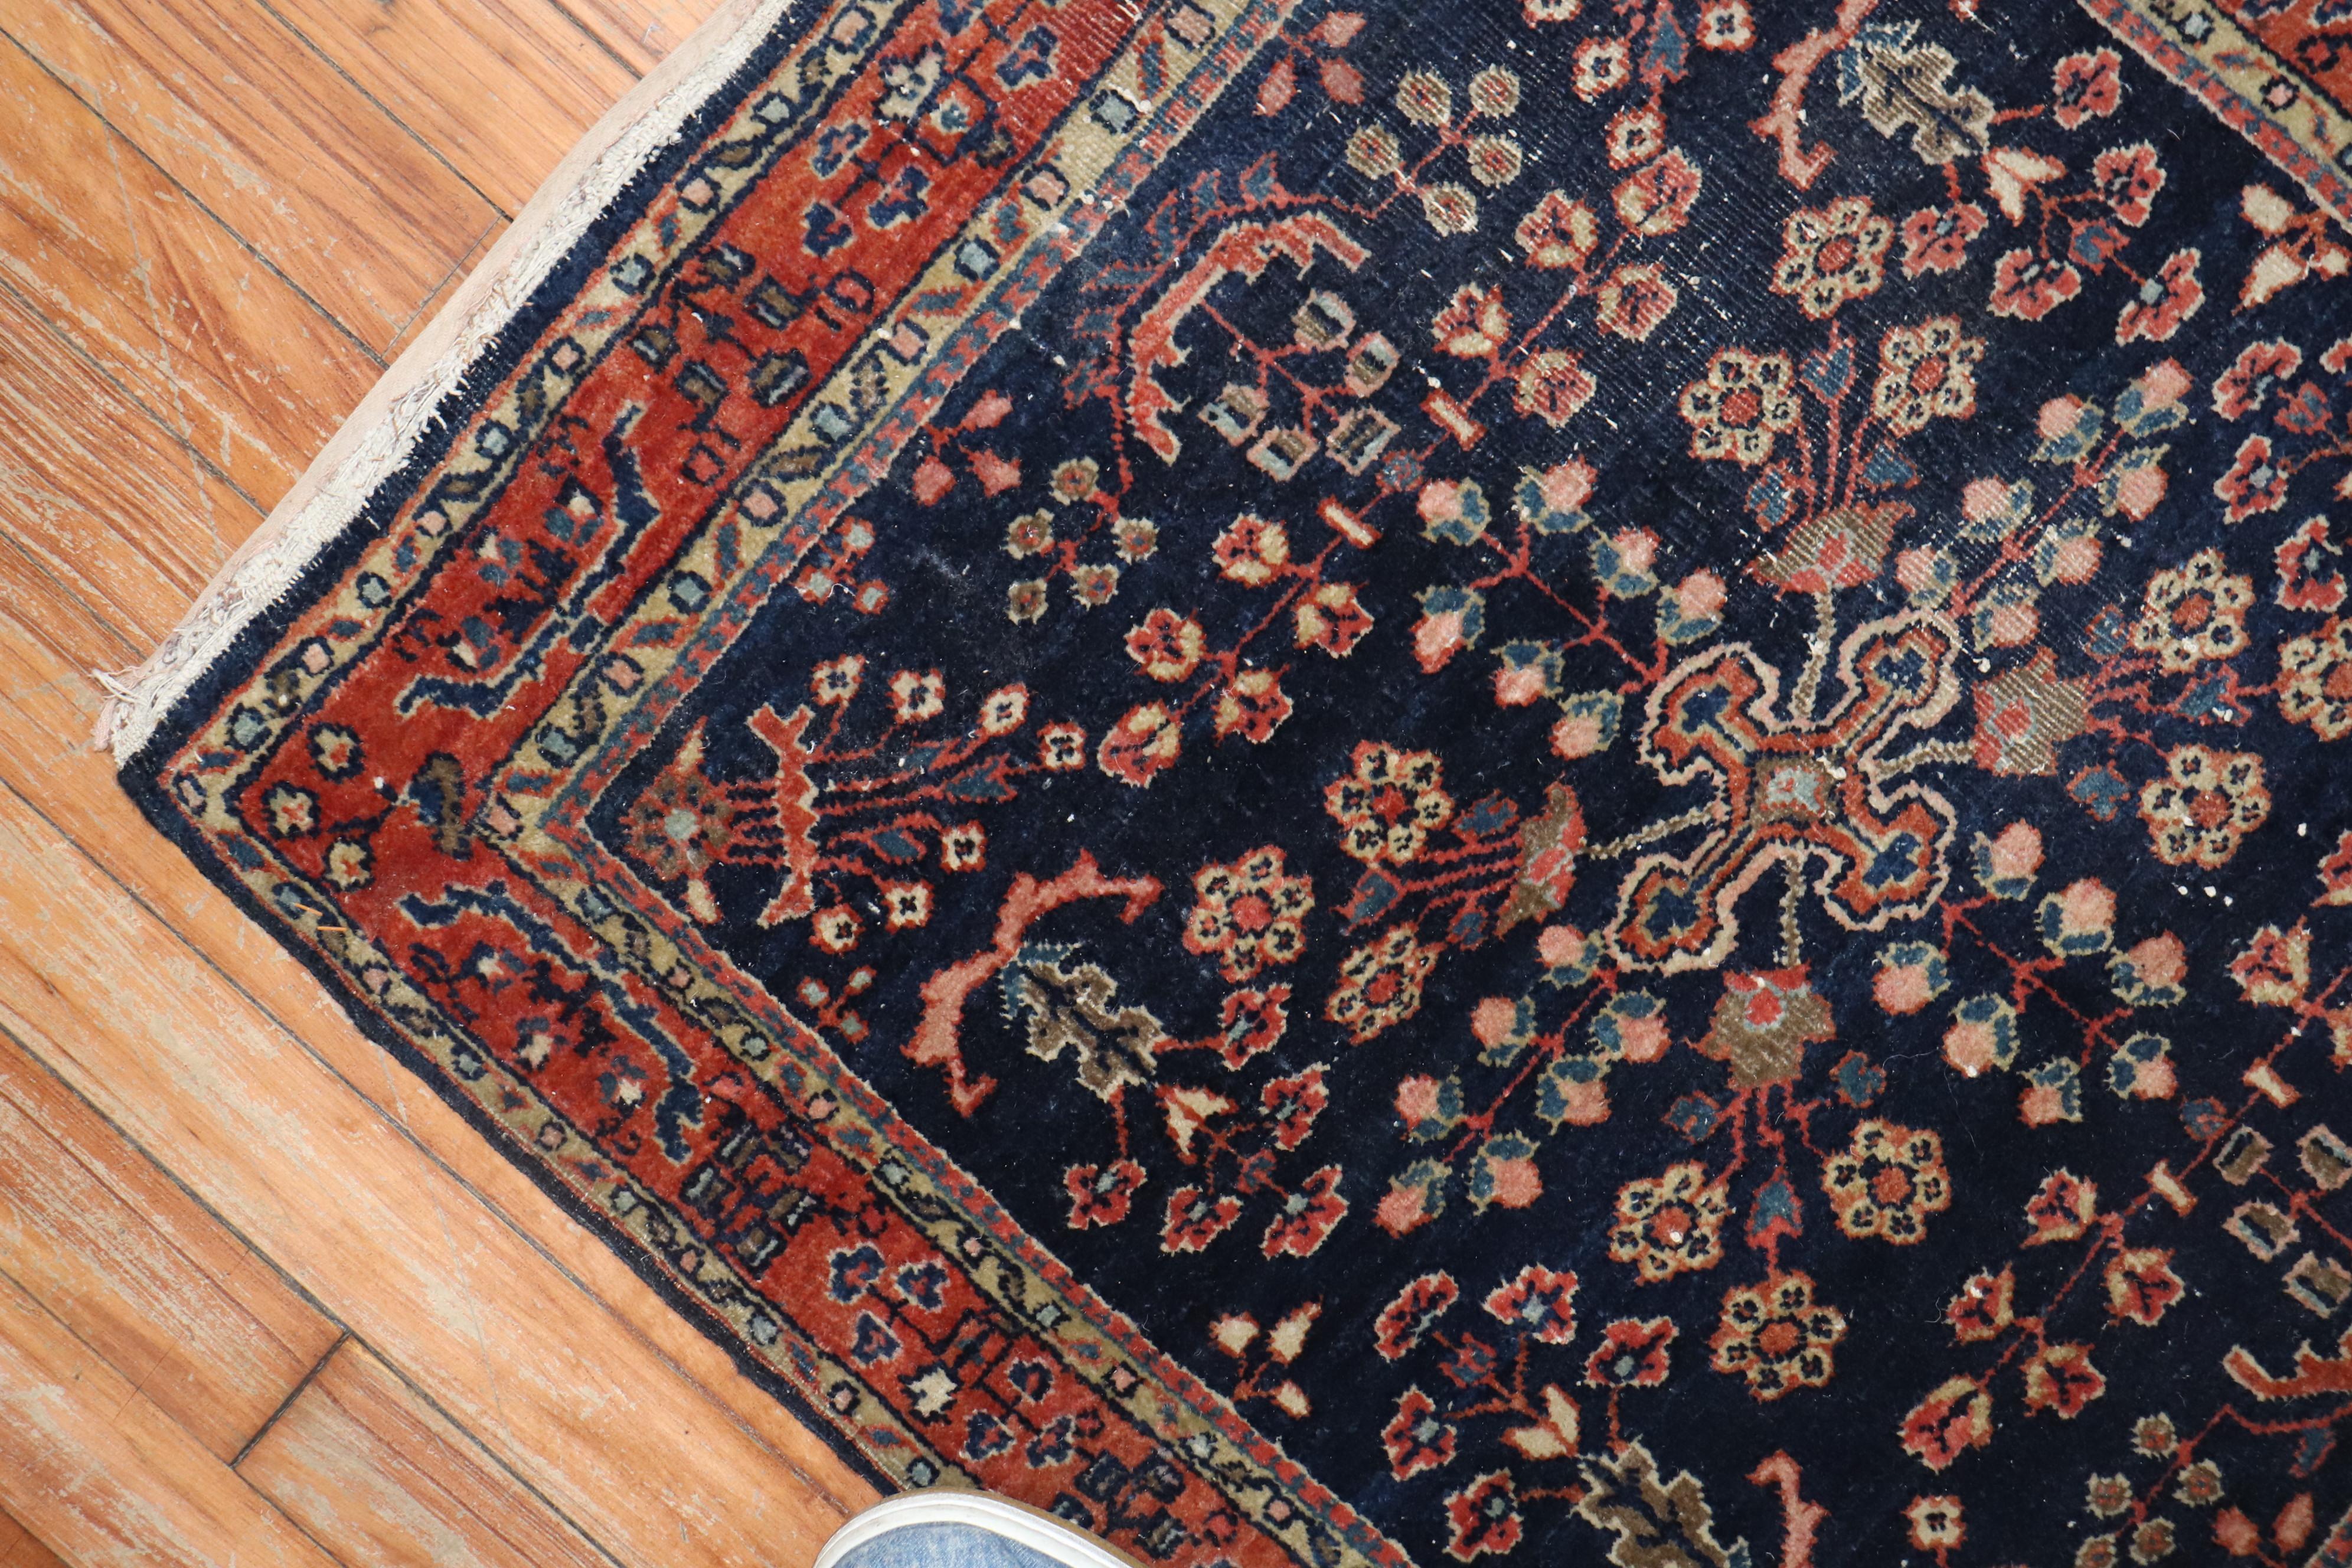 An authentic early 20th century Sarouk carpet with traditional formal design in rare square size.

Measures: 2'2